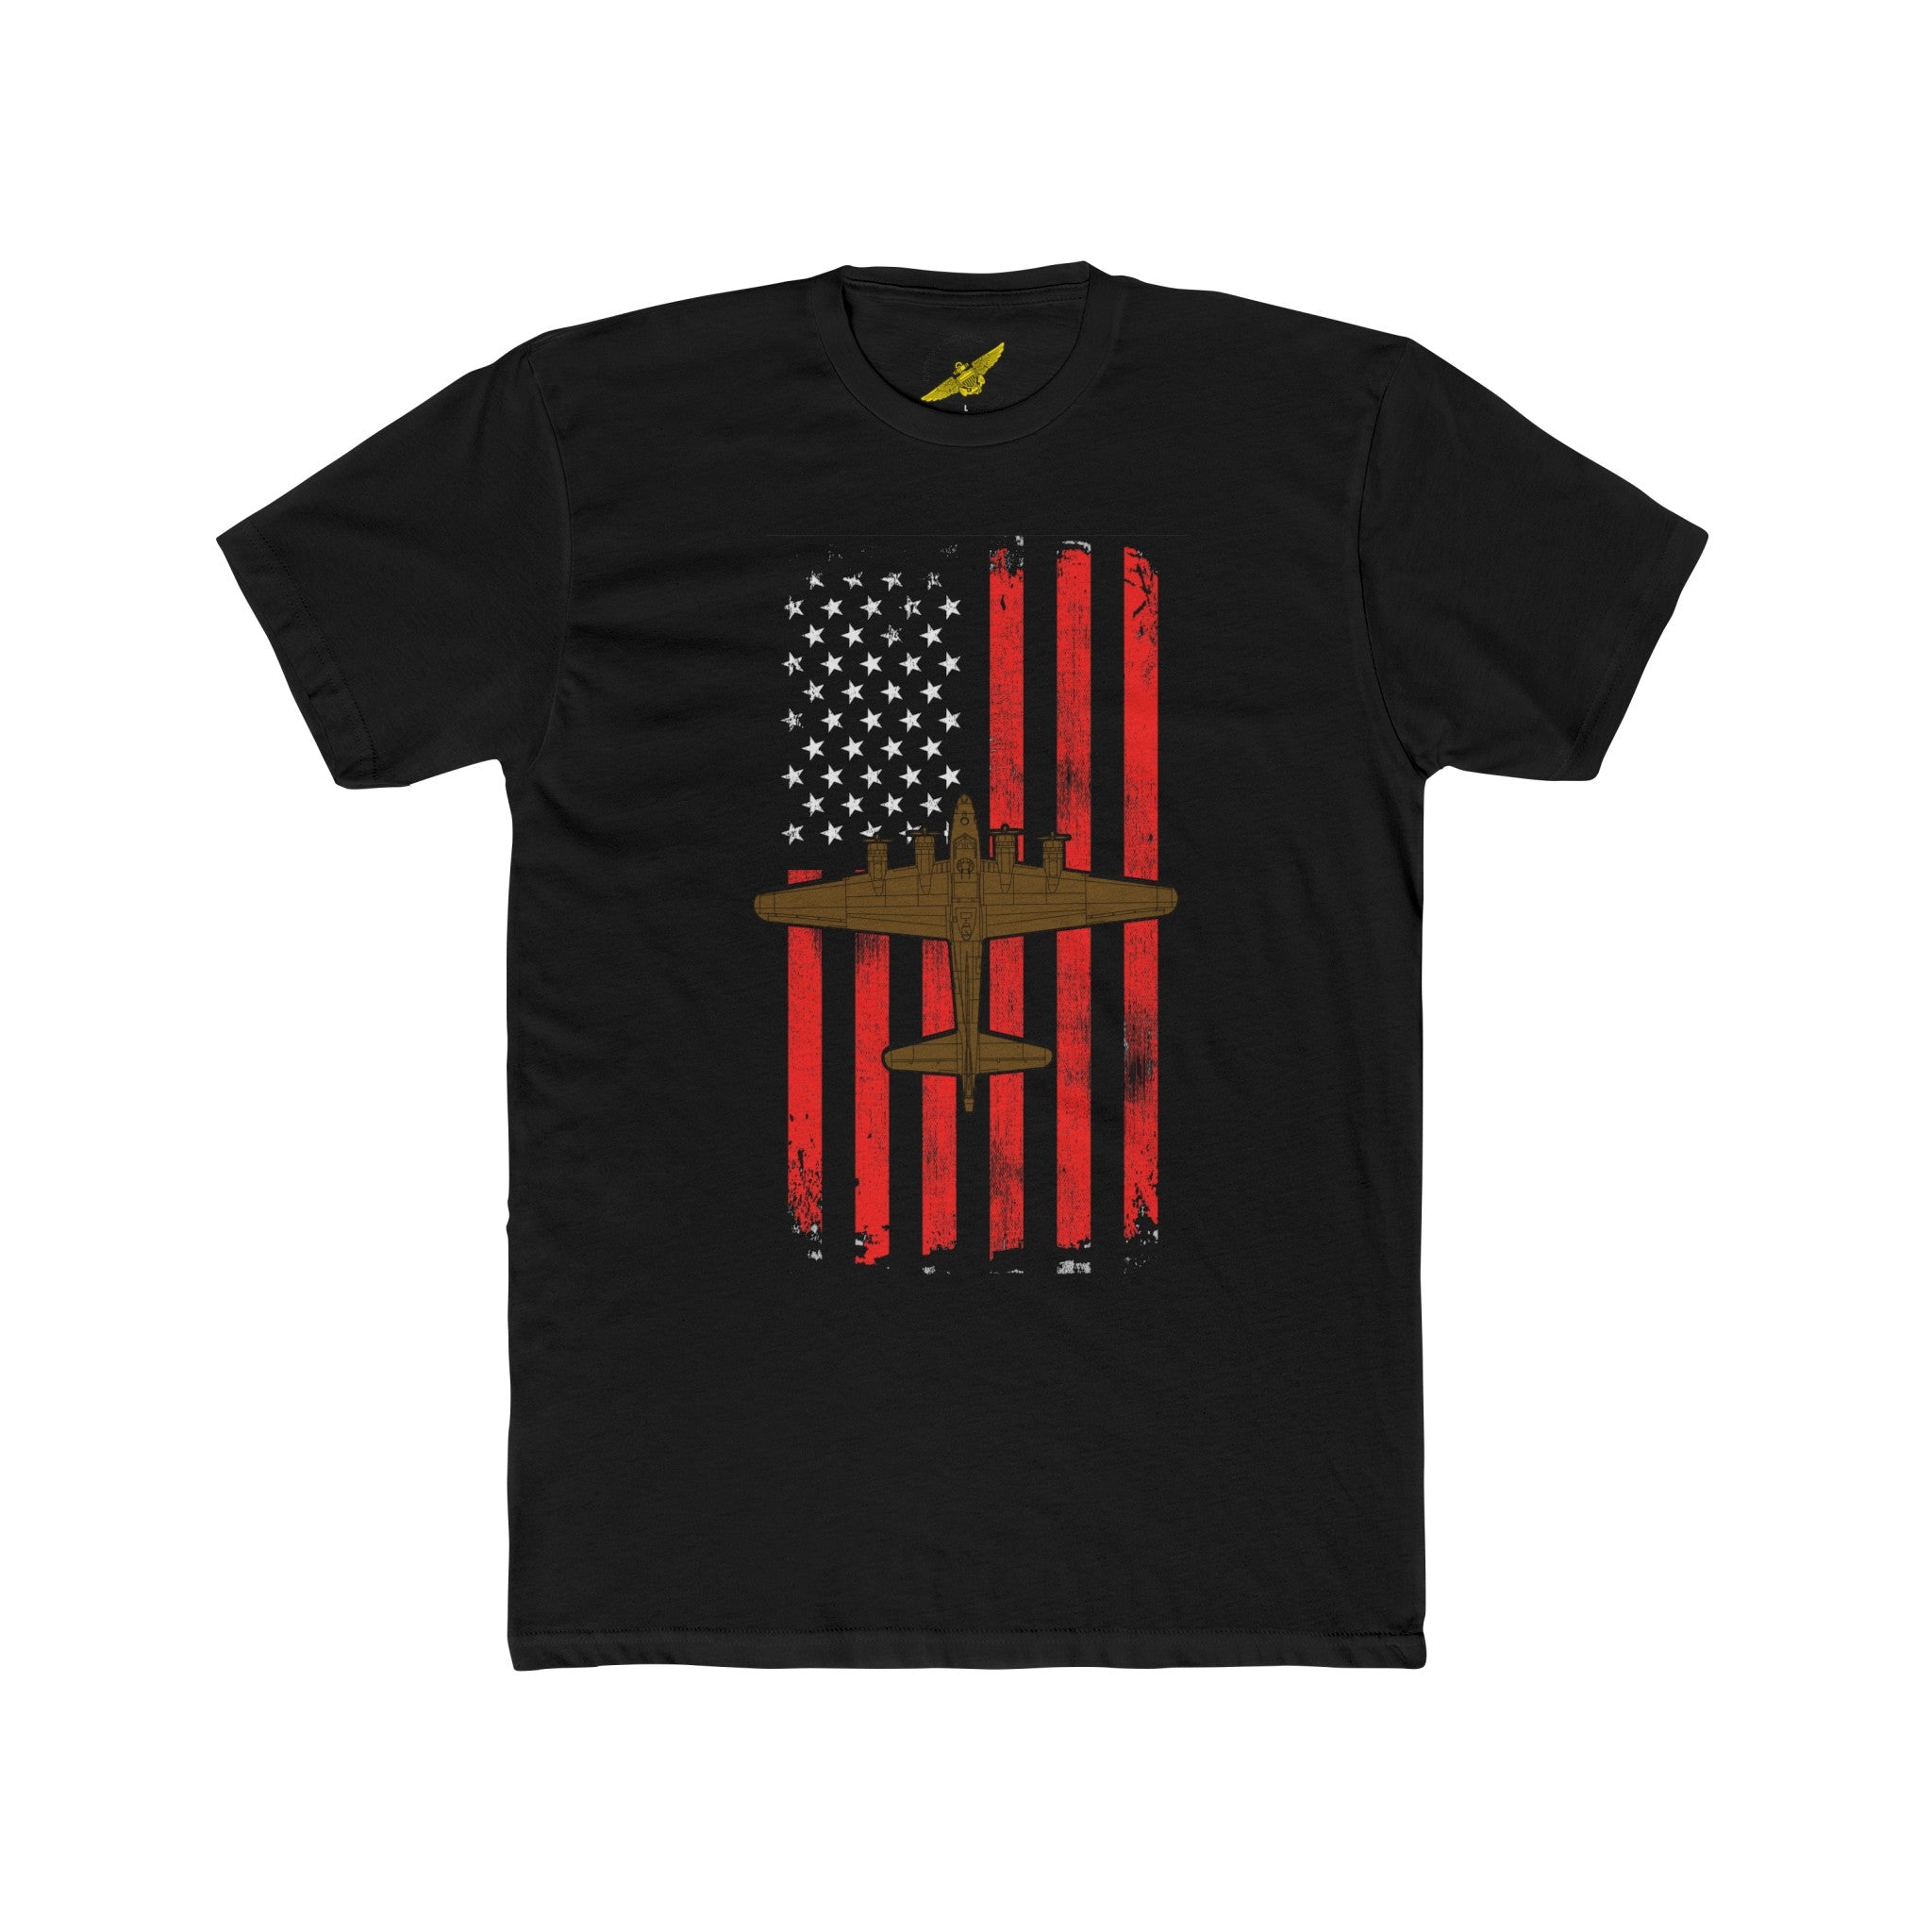 B-17 Flying Fortress Patriotic Flag Men's Cotton Crew Tee, US Army Air Force Strategic Bomber from WWII